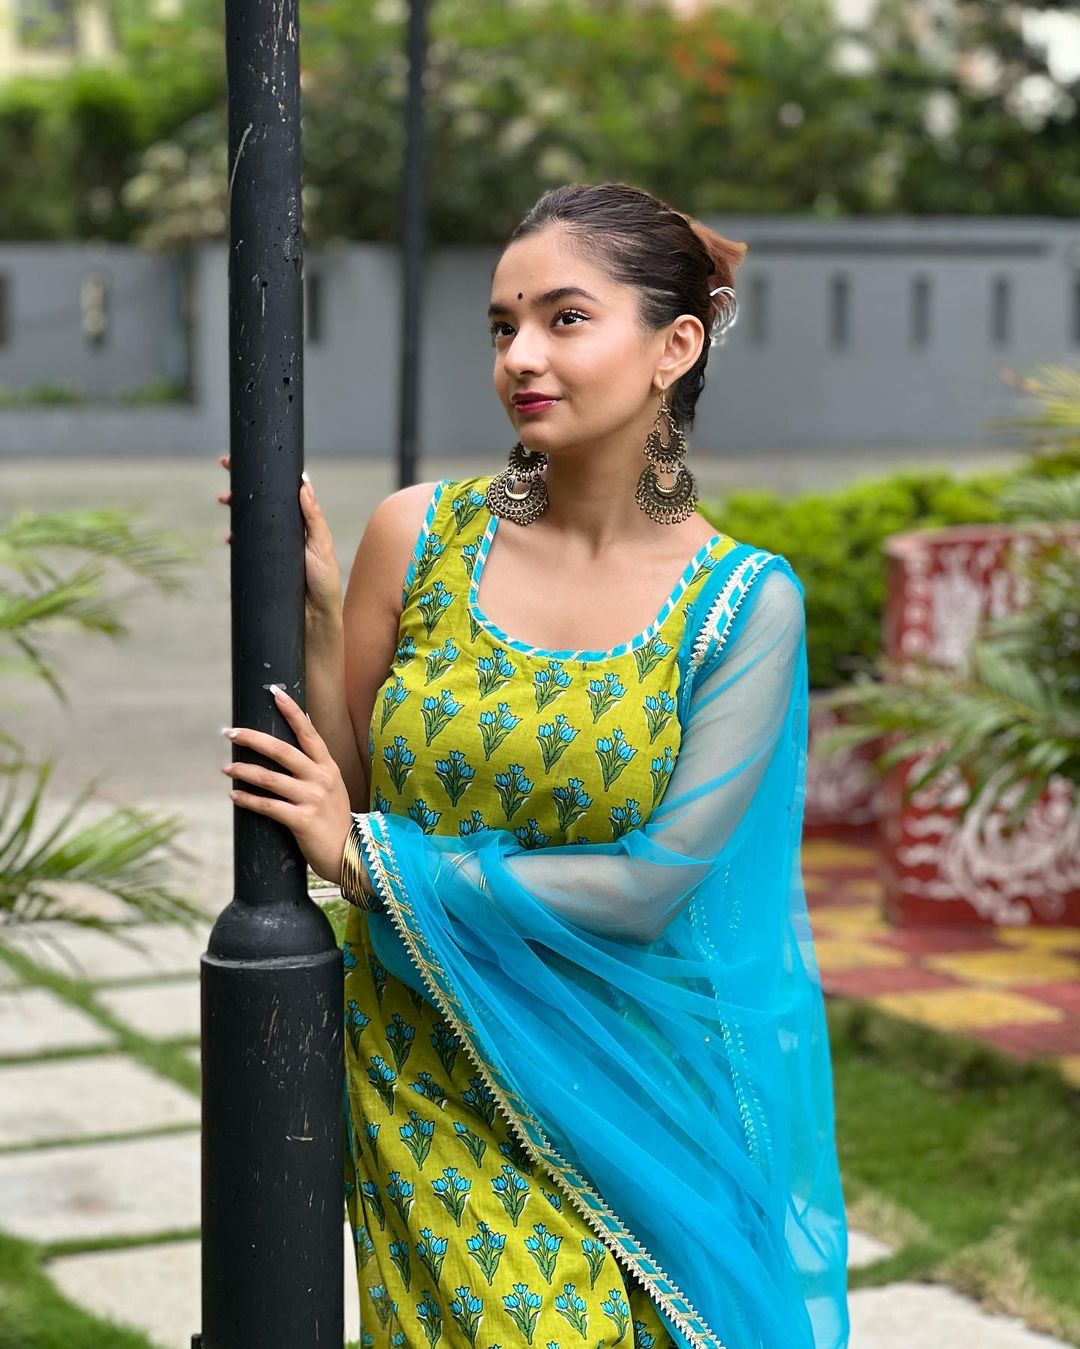 In Pics: Baal Veer actress Anushka Sen turns heavenly in floral green salwar suit, her chandbalis steal the show | IWMBuzz